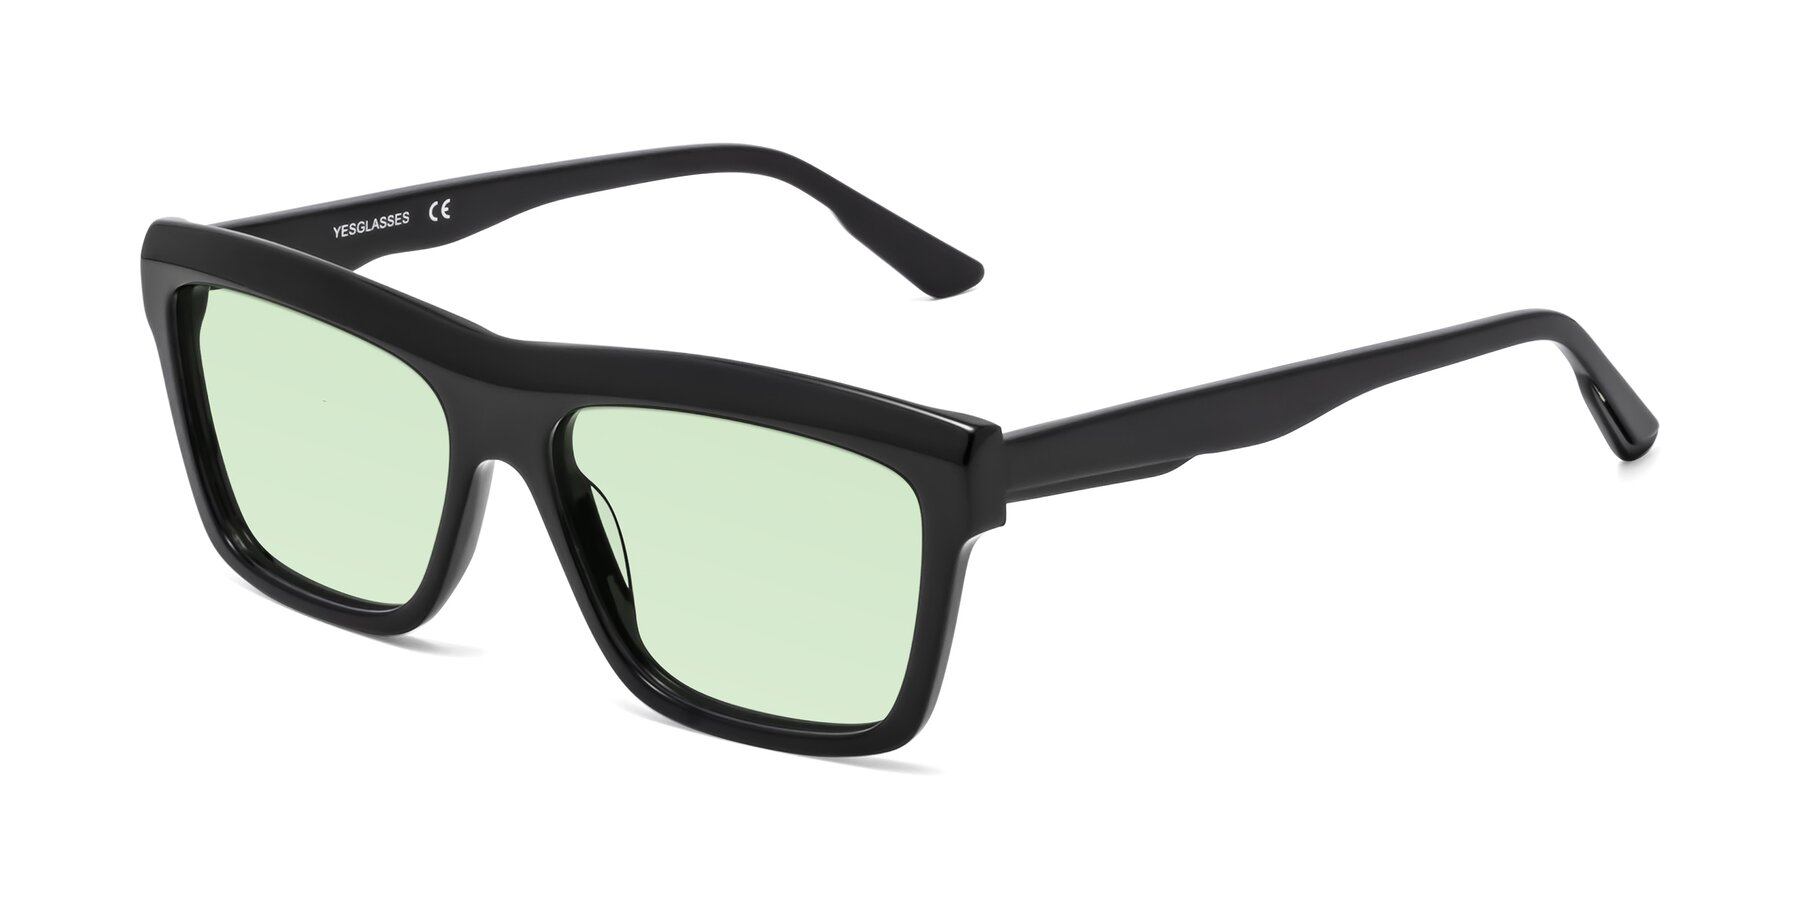 Angle of 1481 in Black with Light Green Tinted Lenses